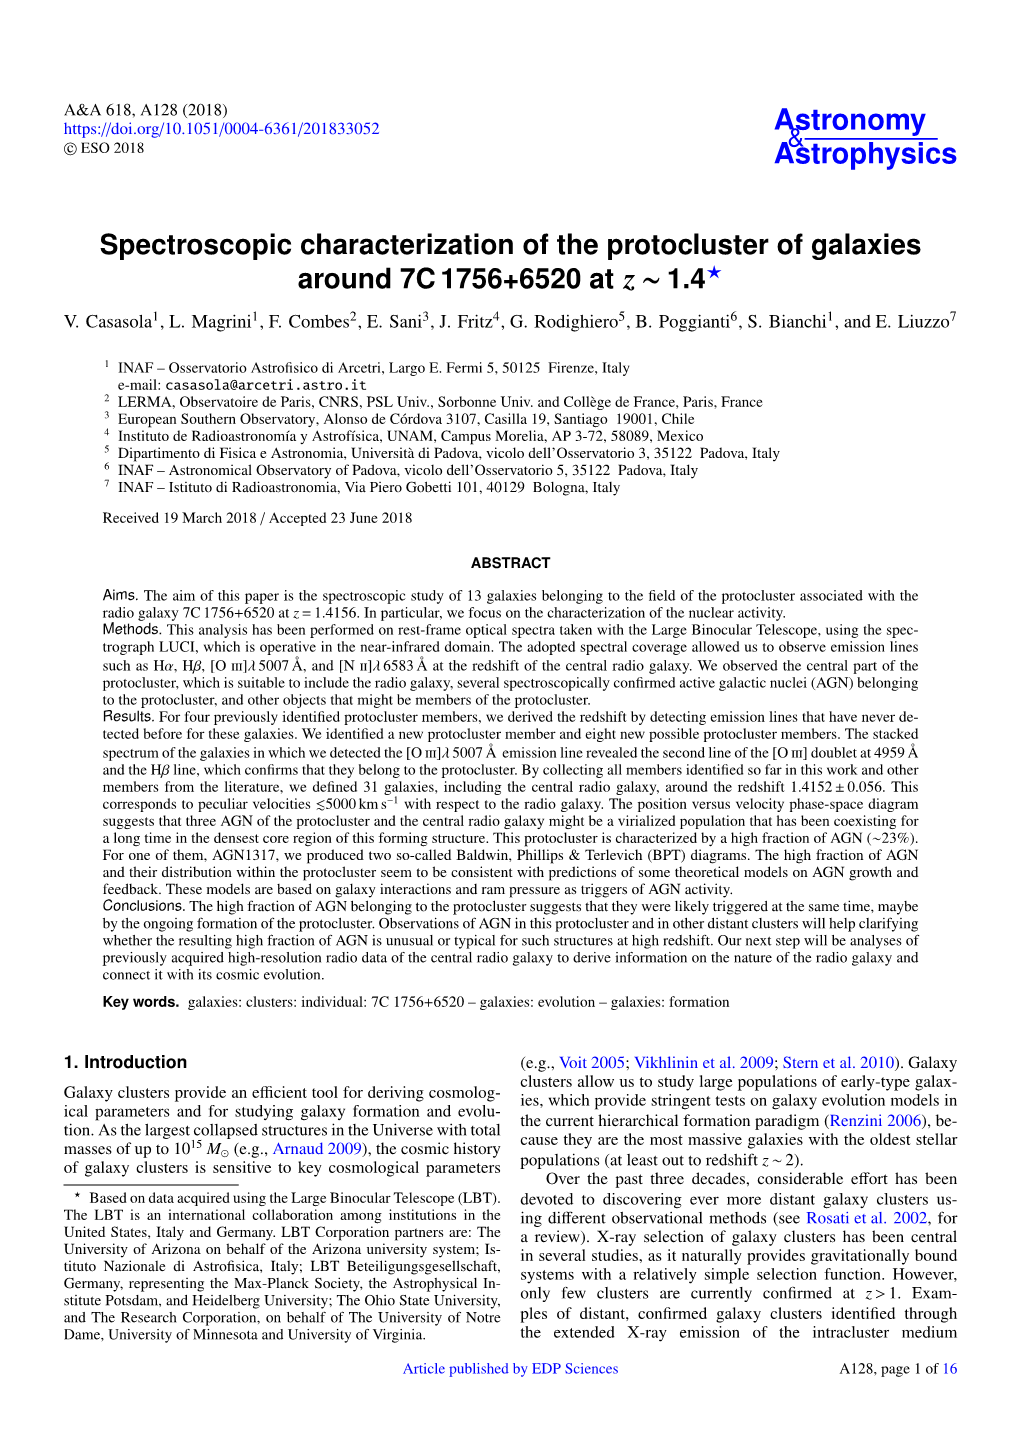 Spectroscopic Characterization of the Protocluster of Galaxies Around 7C 1756+6520 at Z ~